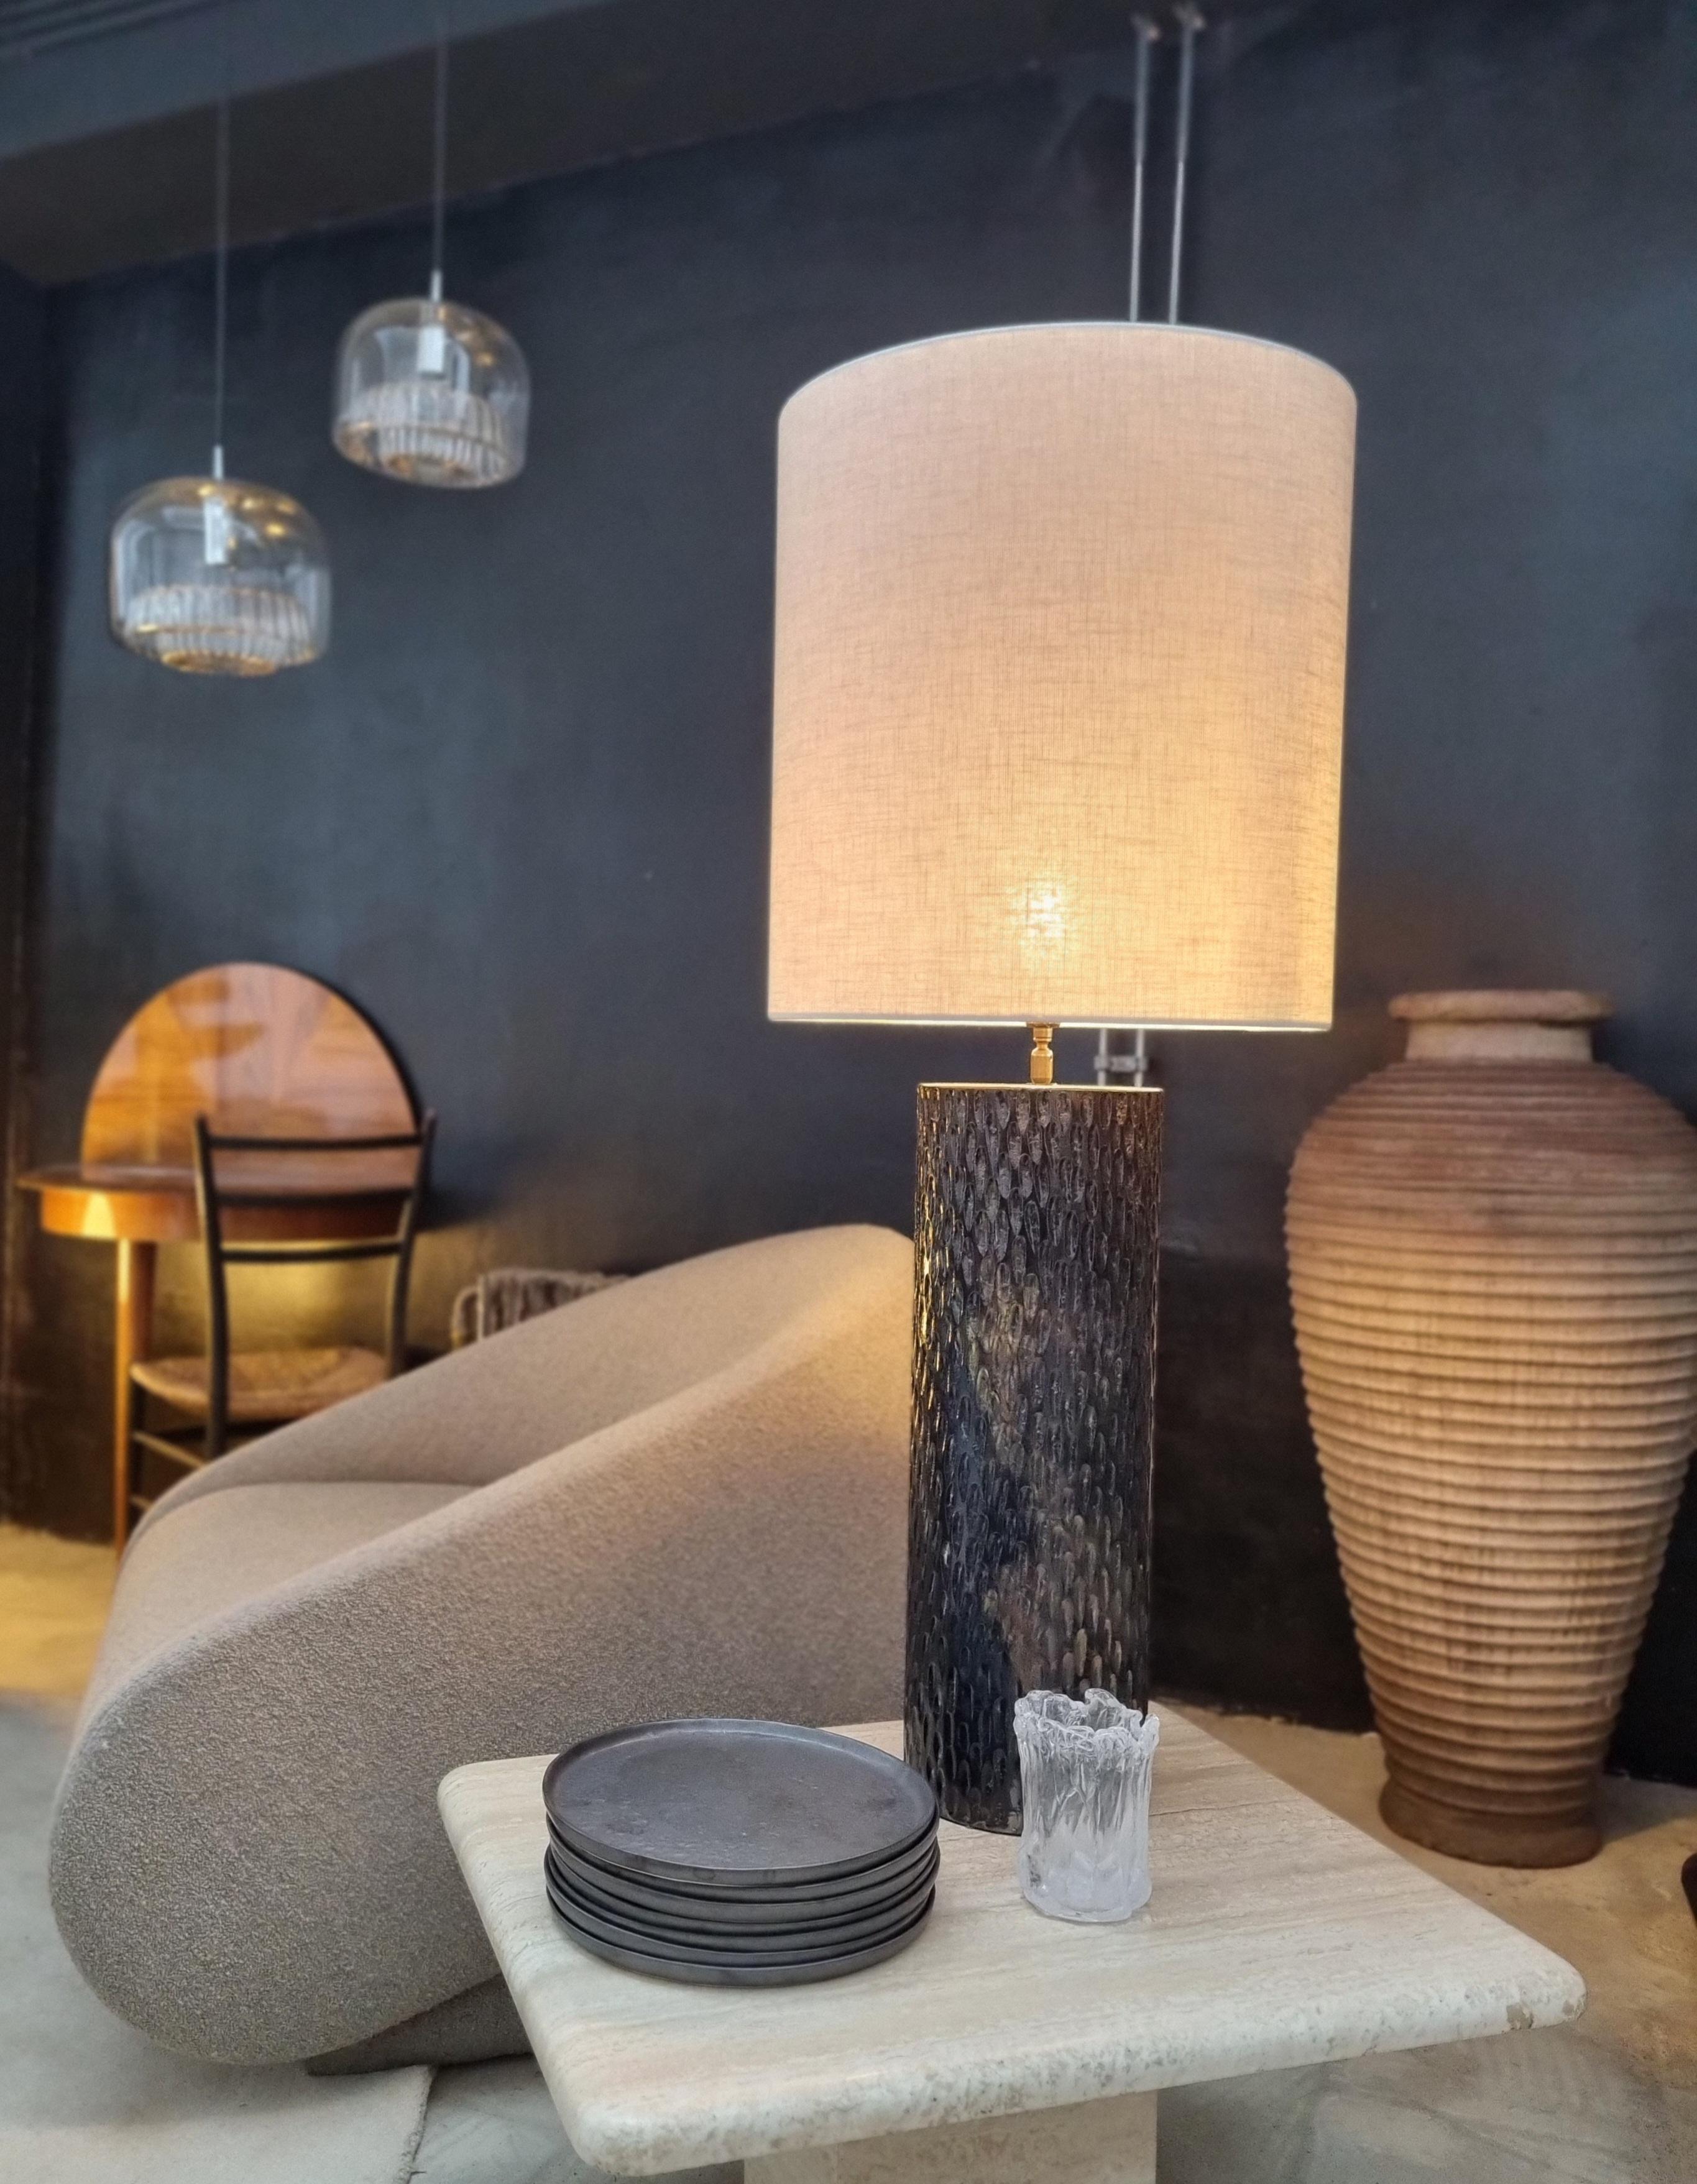 This Cylinder lamp is hand made in The Netherlands with love and respect for people and the planet. Therefore all materials used are as close to nature as possible.

The ceramics are fired using some basic principles of the technique generally